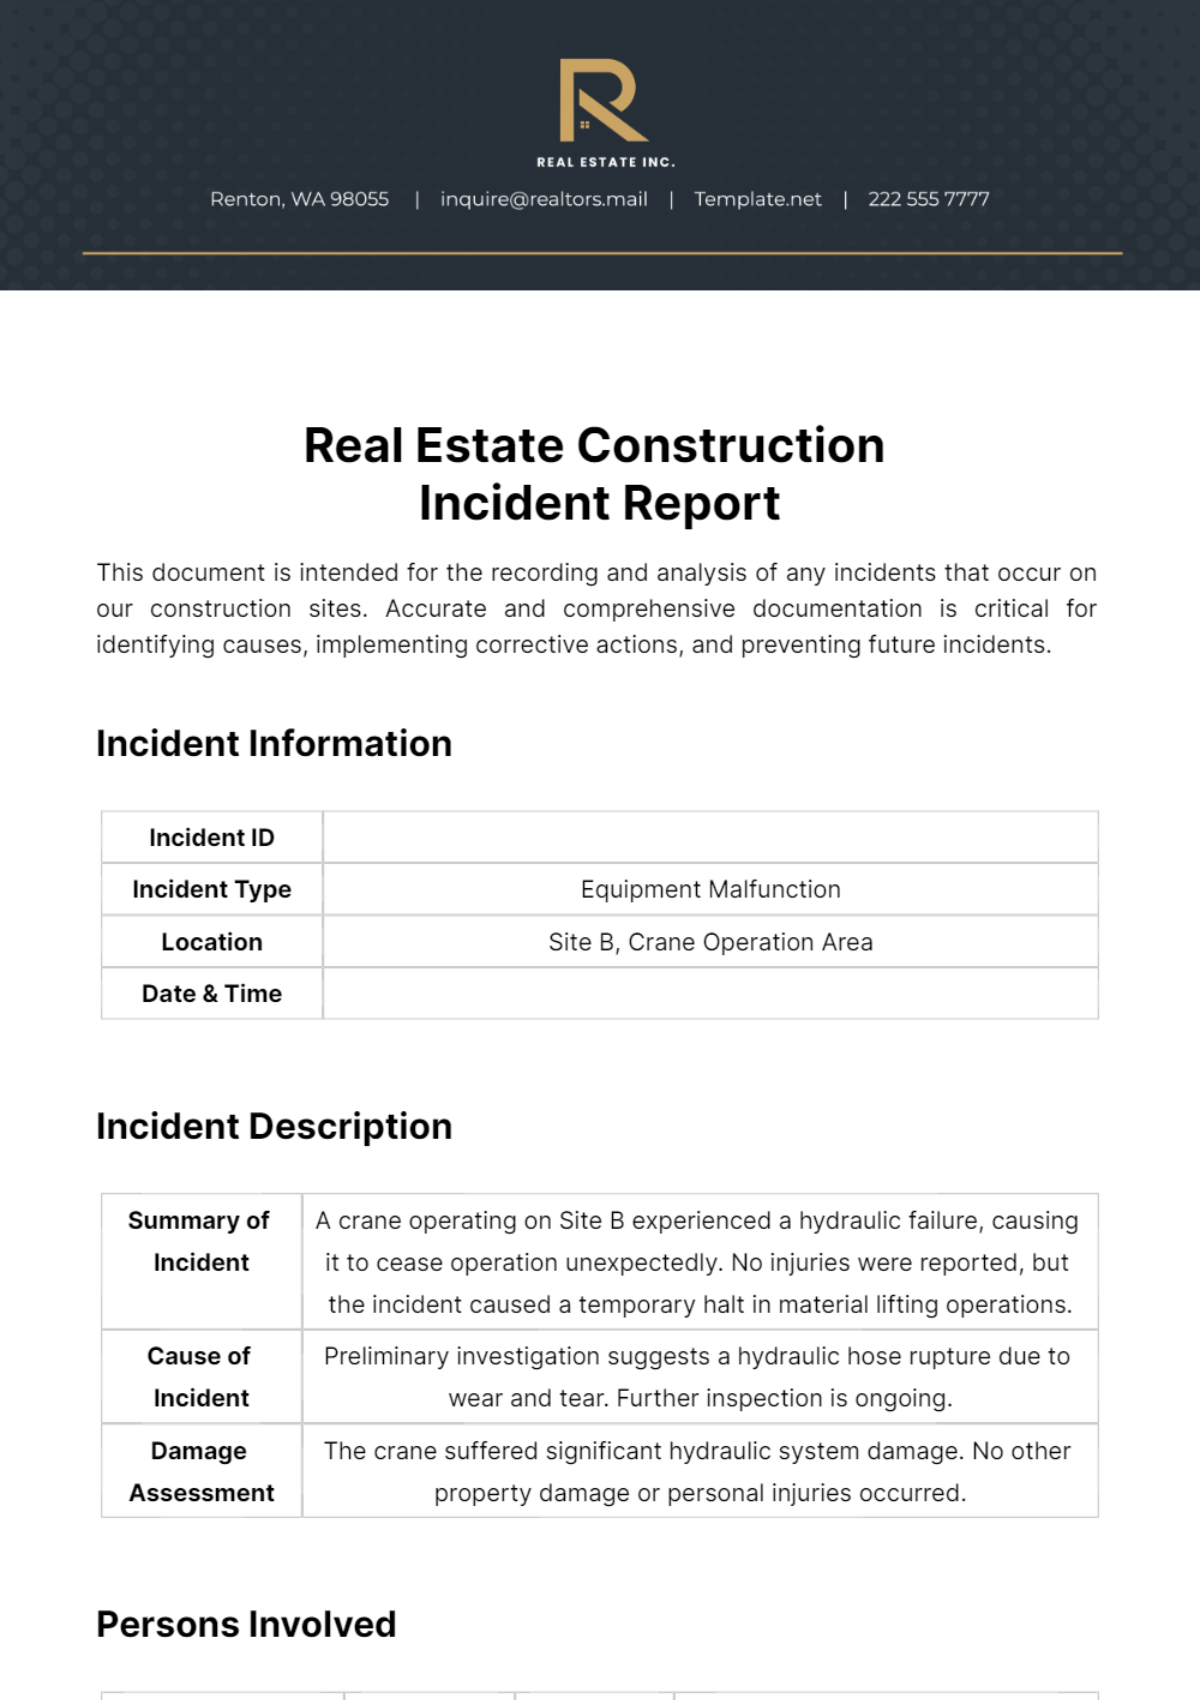 Real Estate Construction Incident Report Template